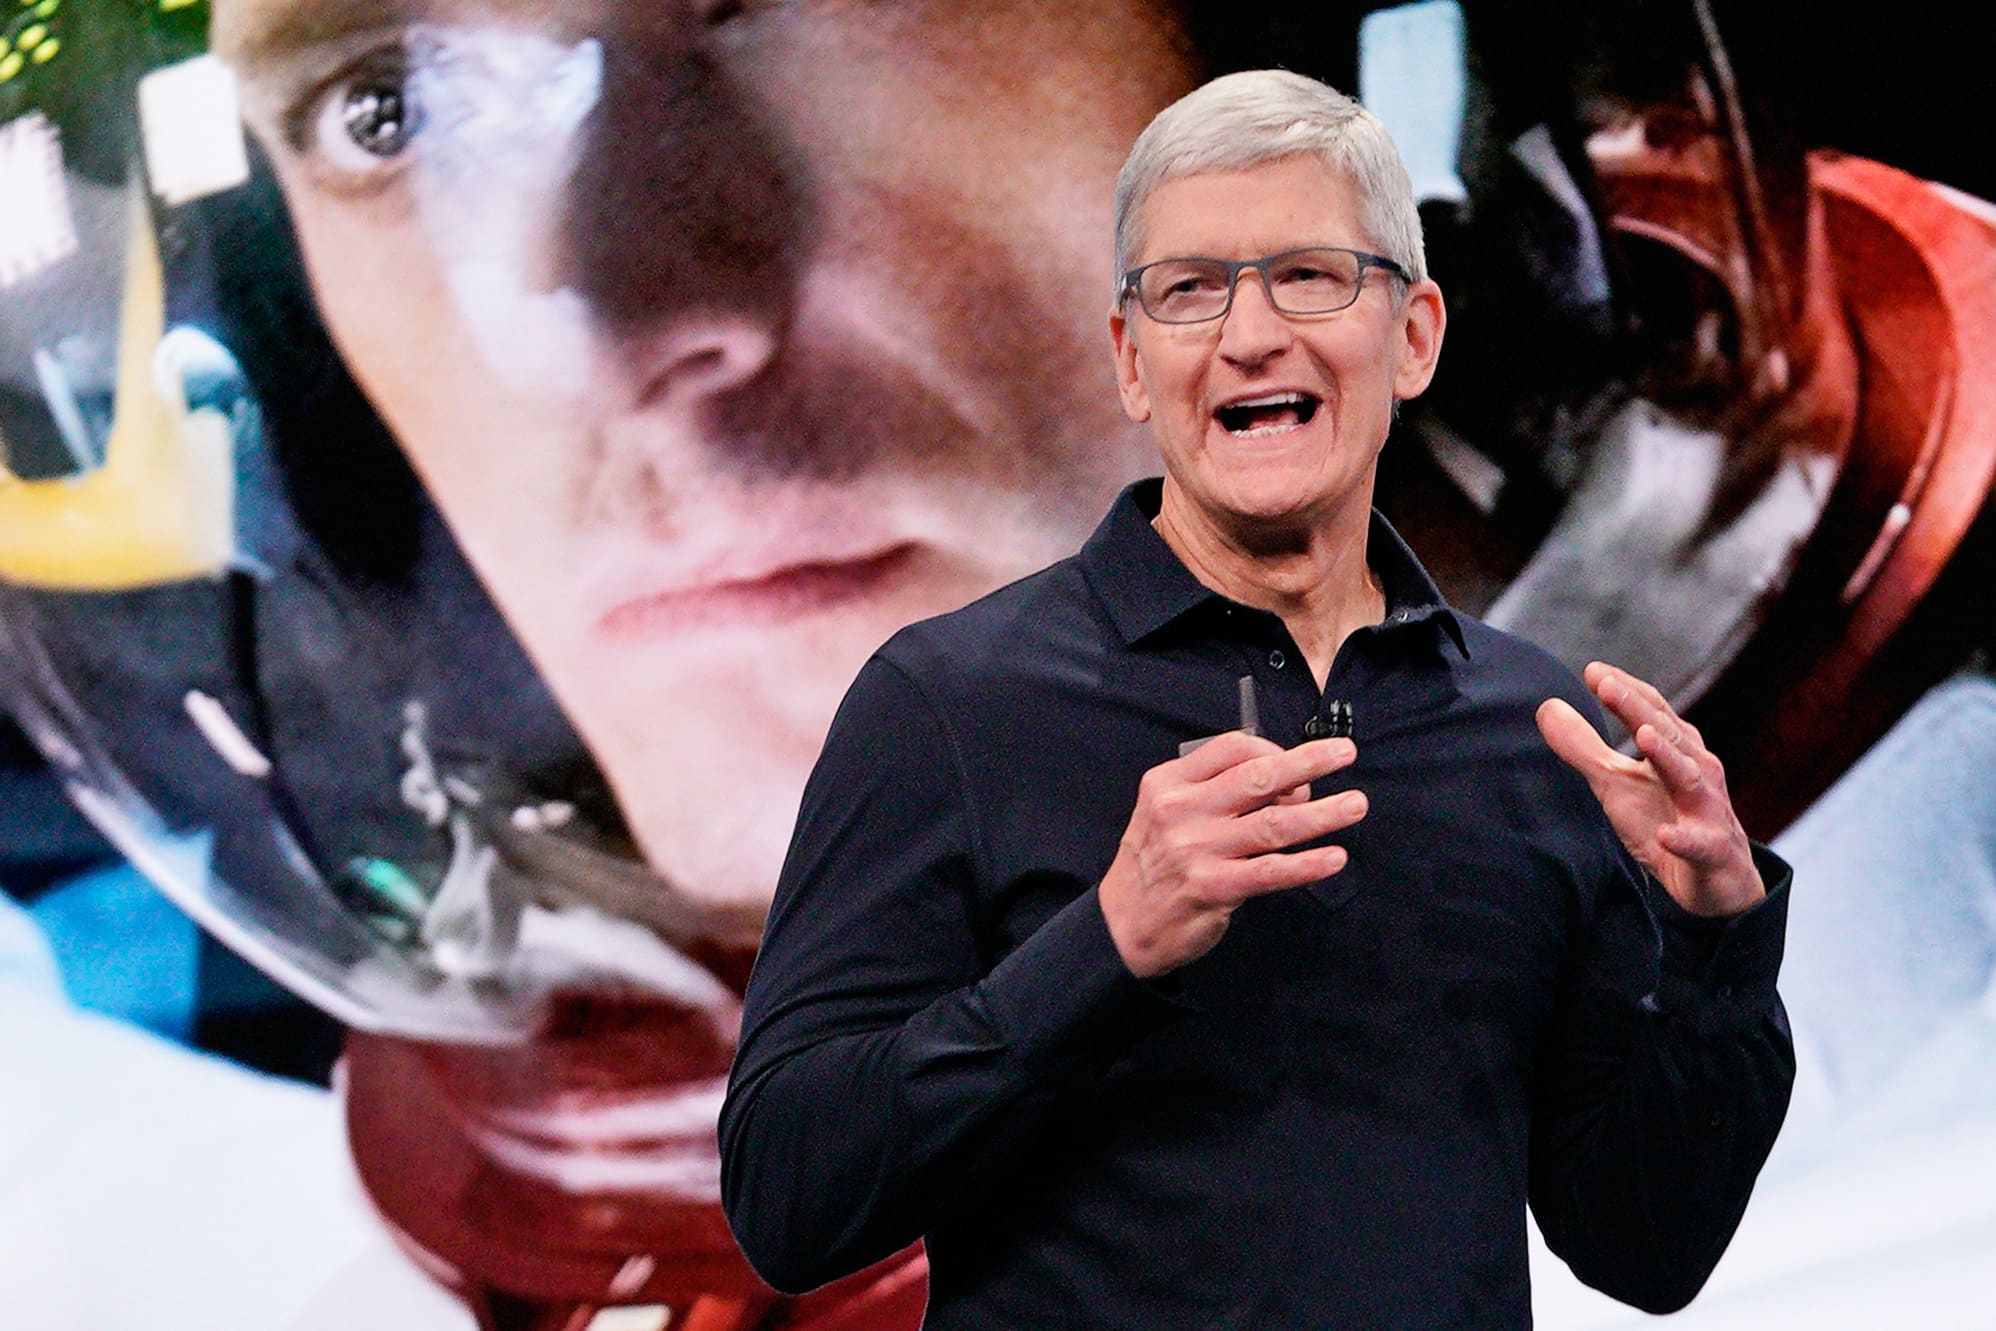 Apple iPhone revenue drops 7% from last year as coronavirus hits supply chain and demand - CNBC